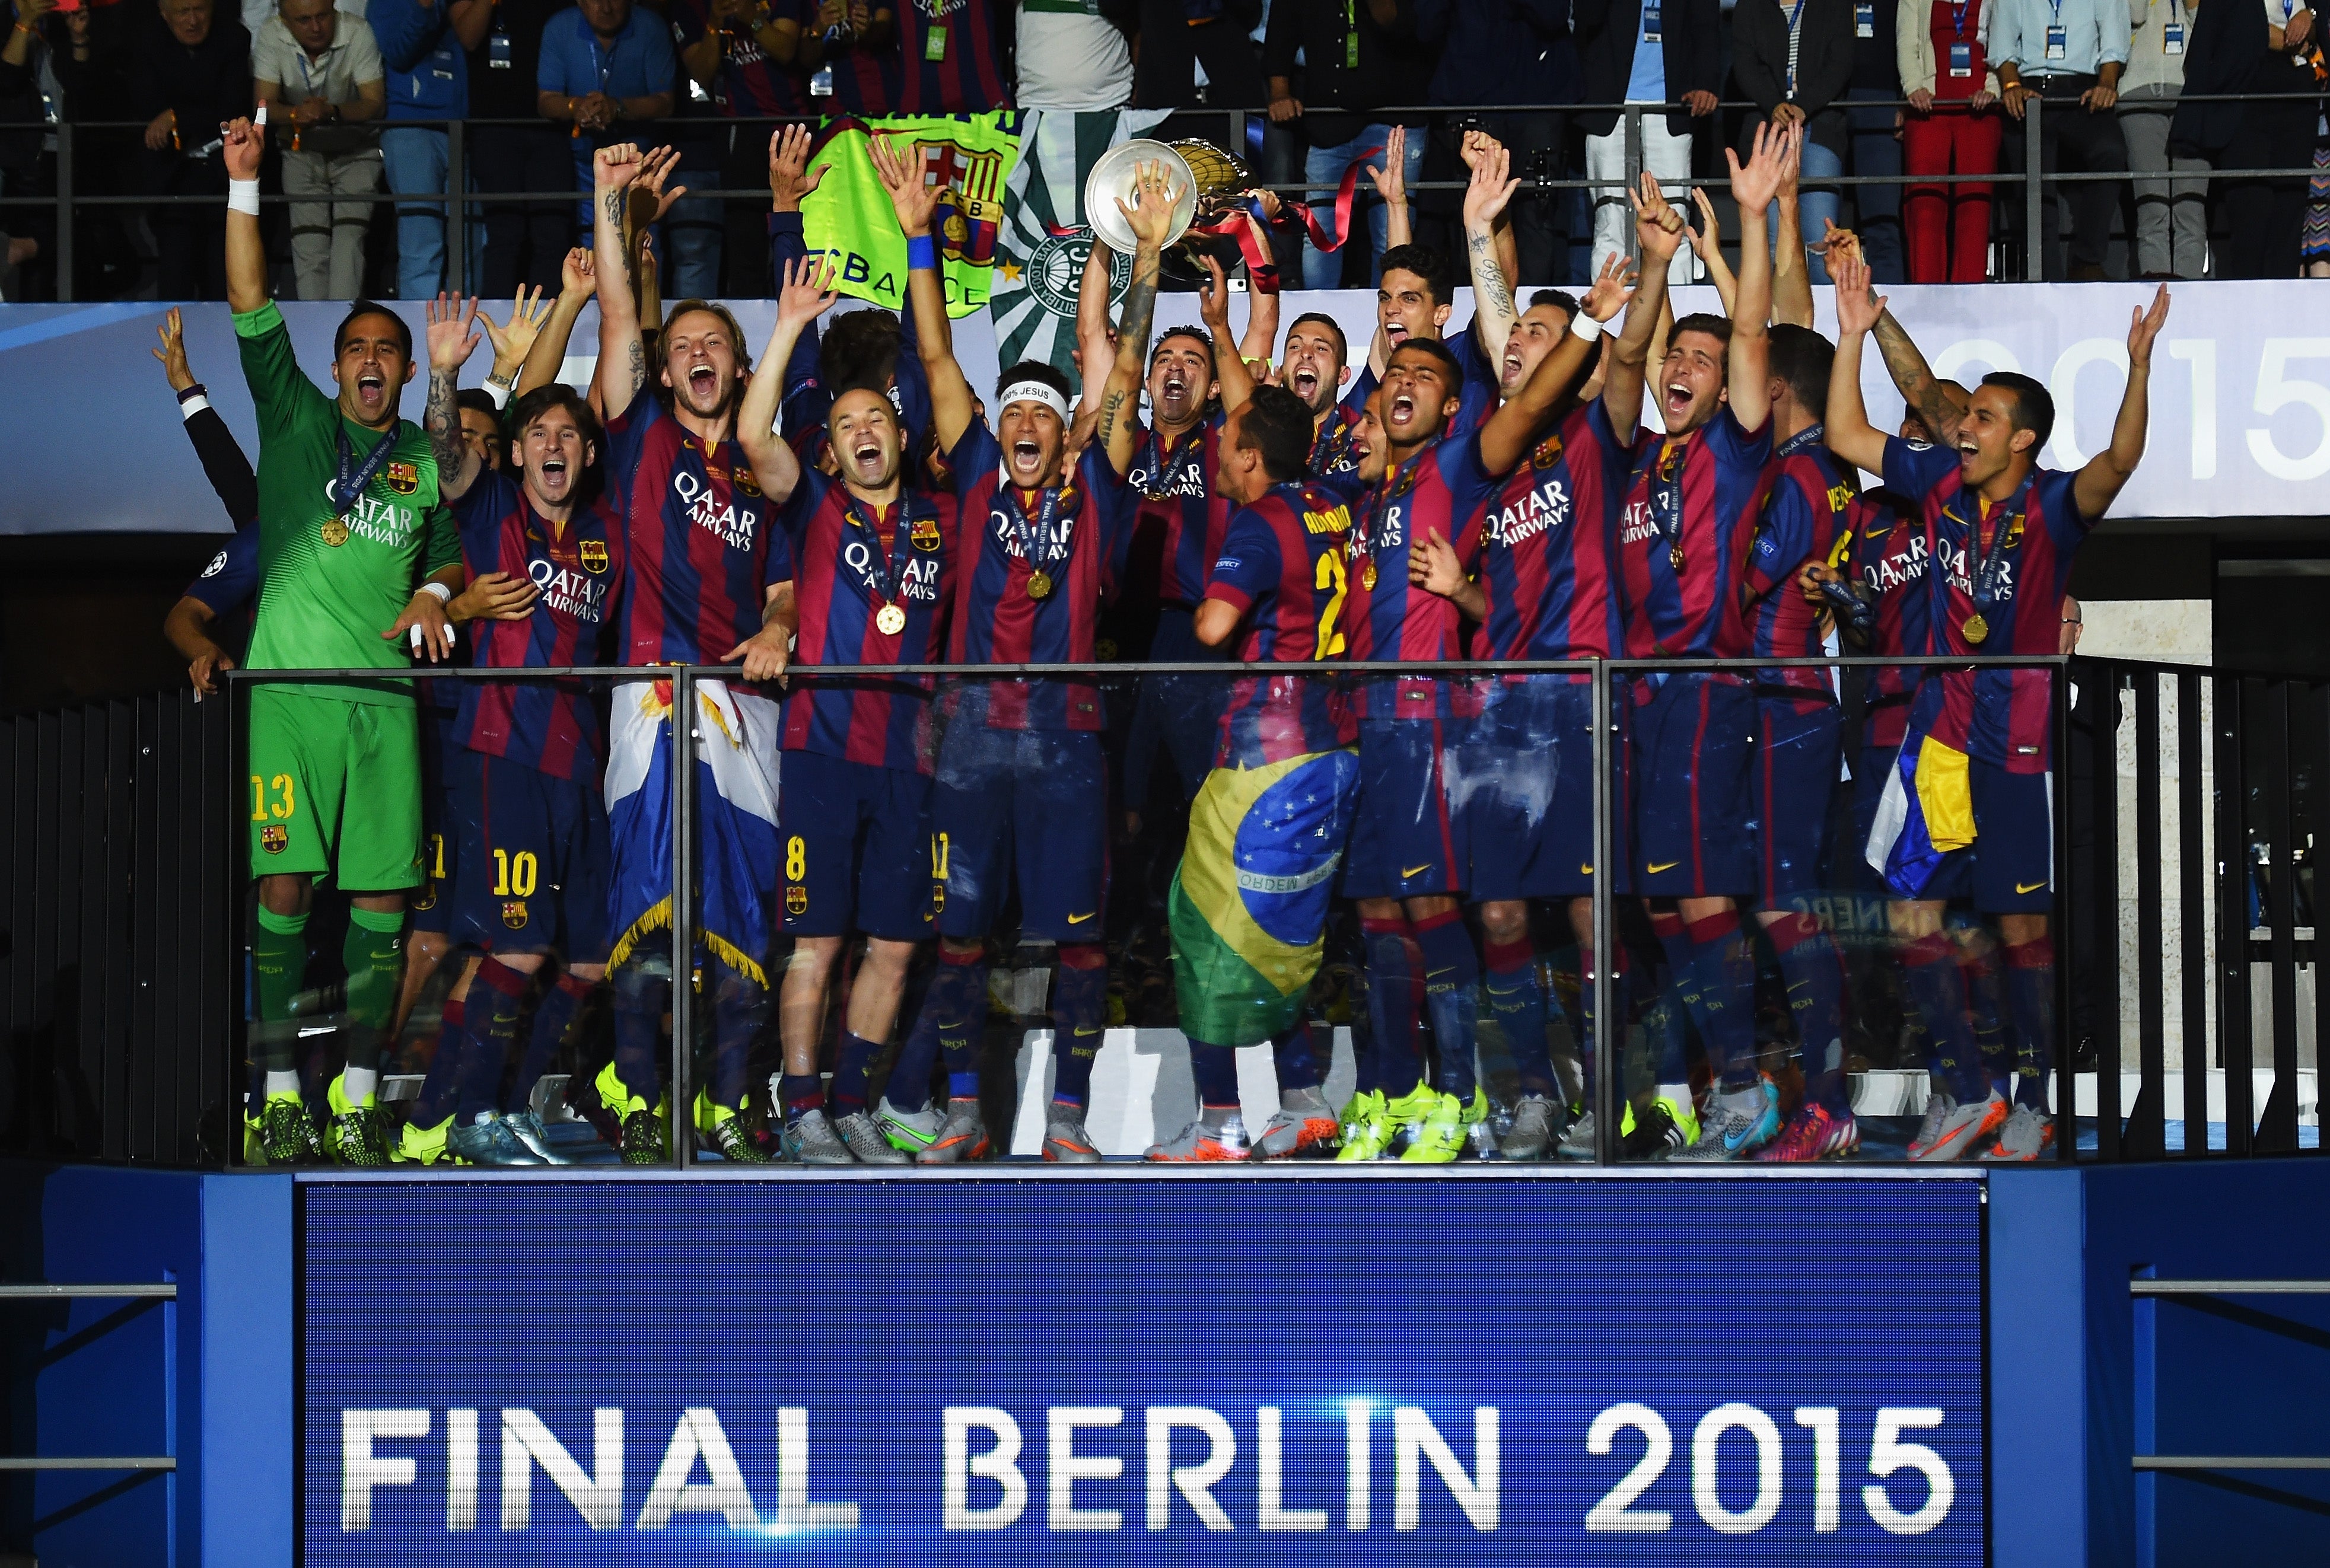 Barcelona won the treble in 2015 with an 83.6 per cent win ratio